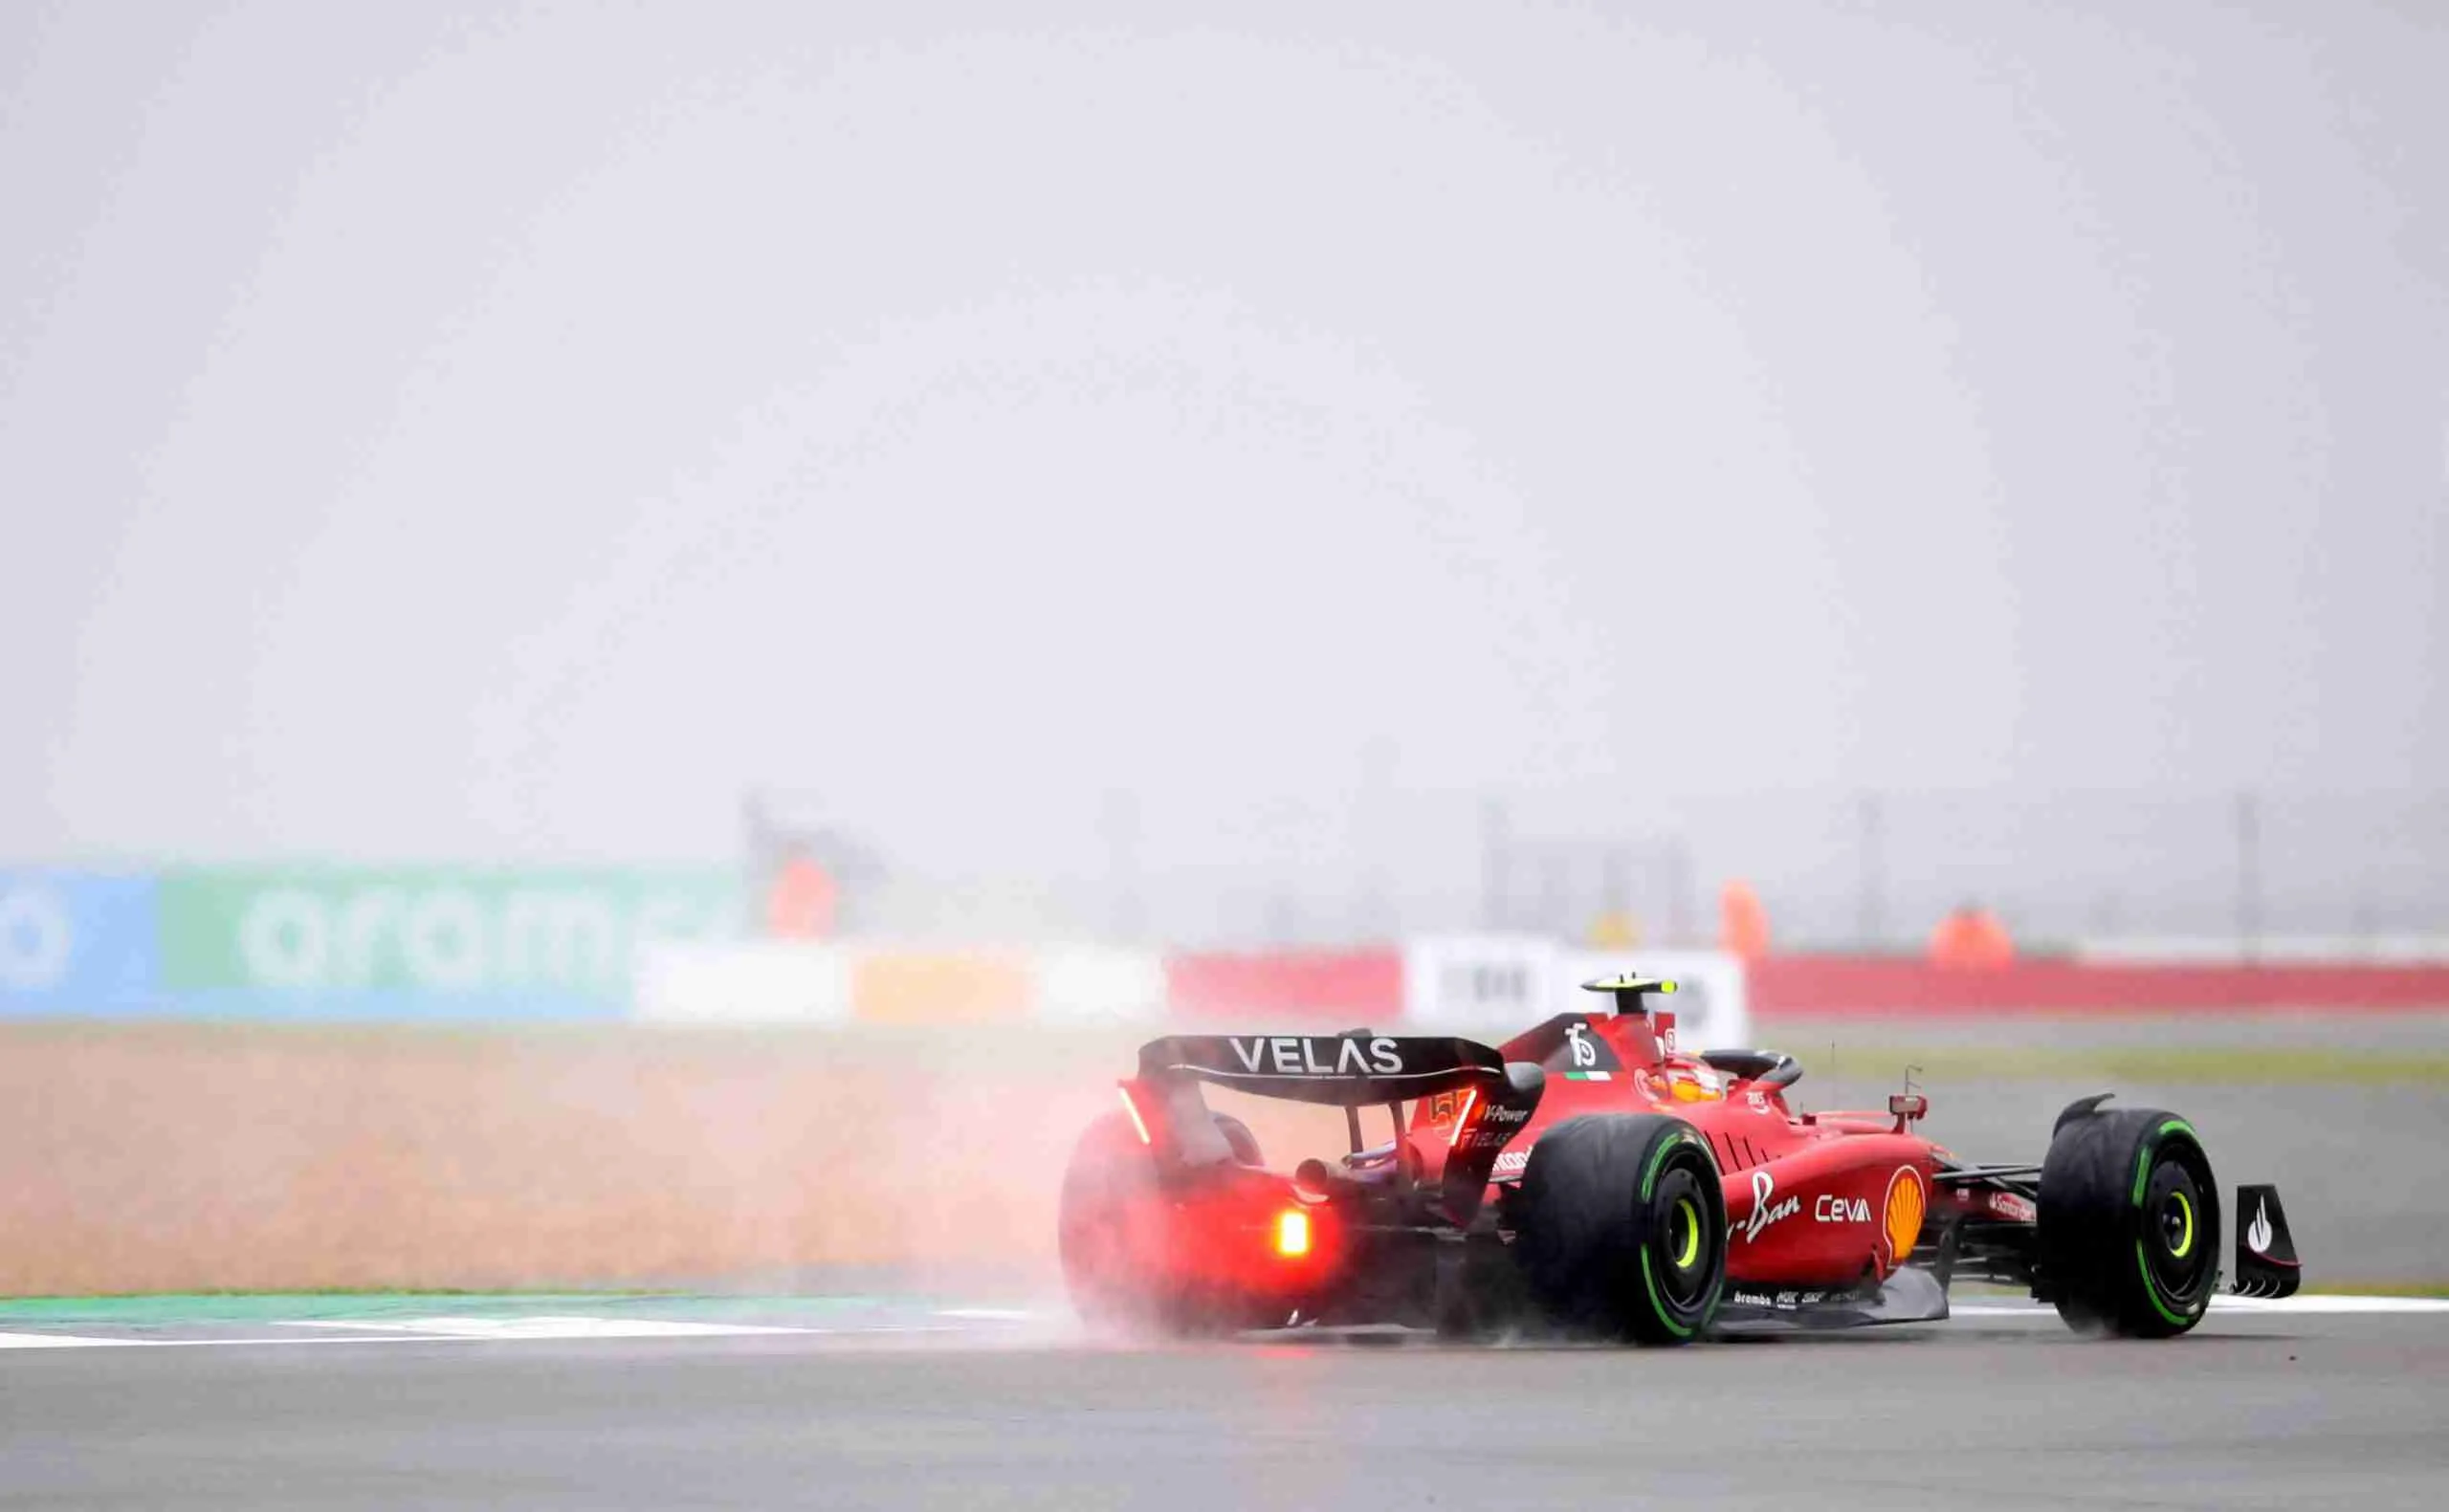 Pirelli and Ferrari Join Forces for Innovative Wet-Weather F1 Tire Trial